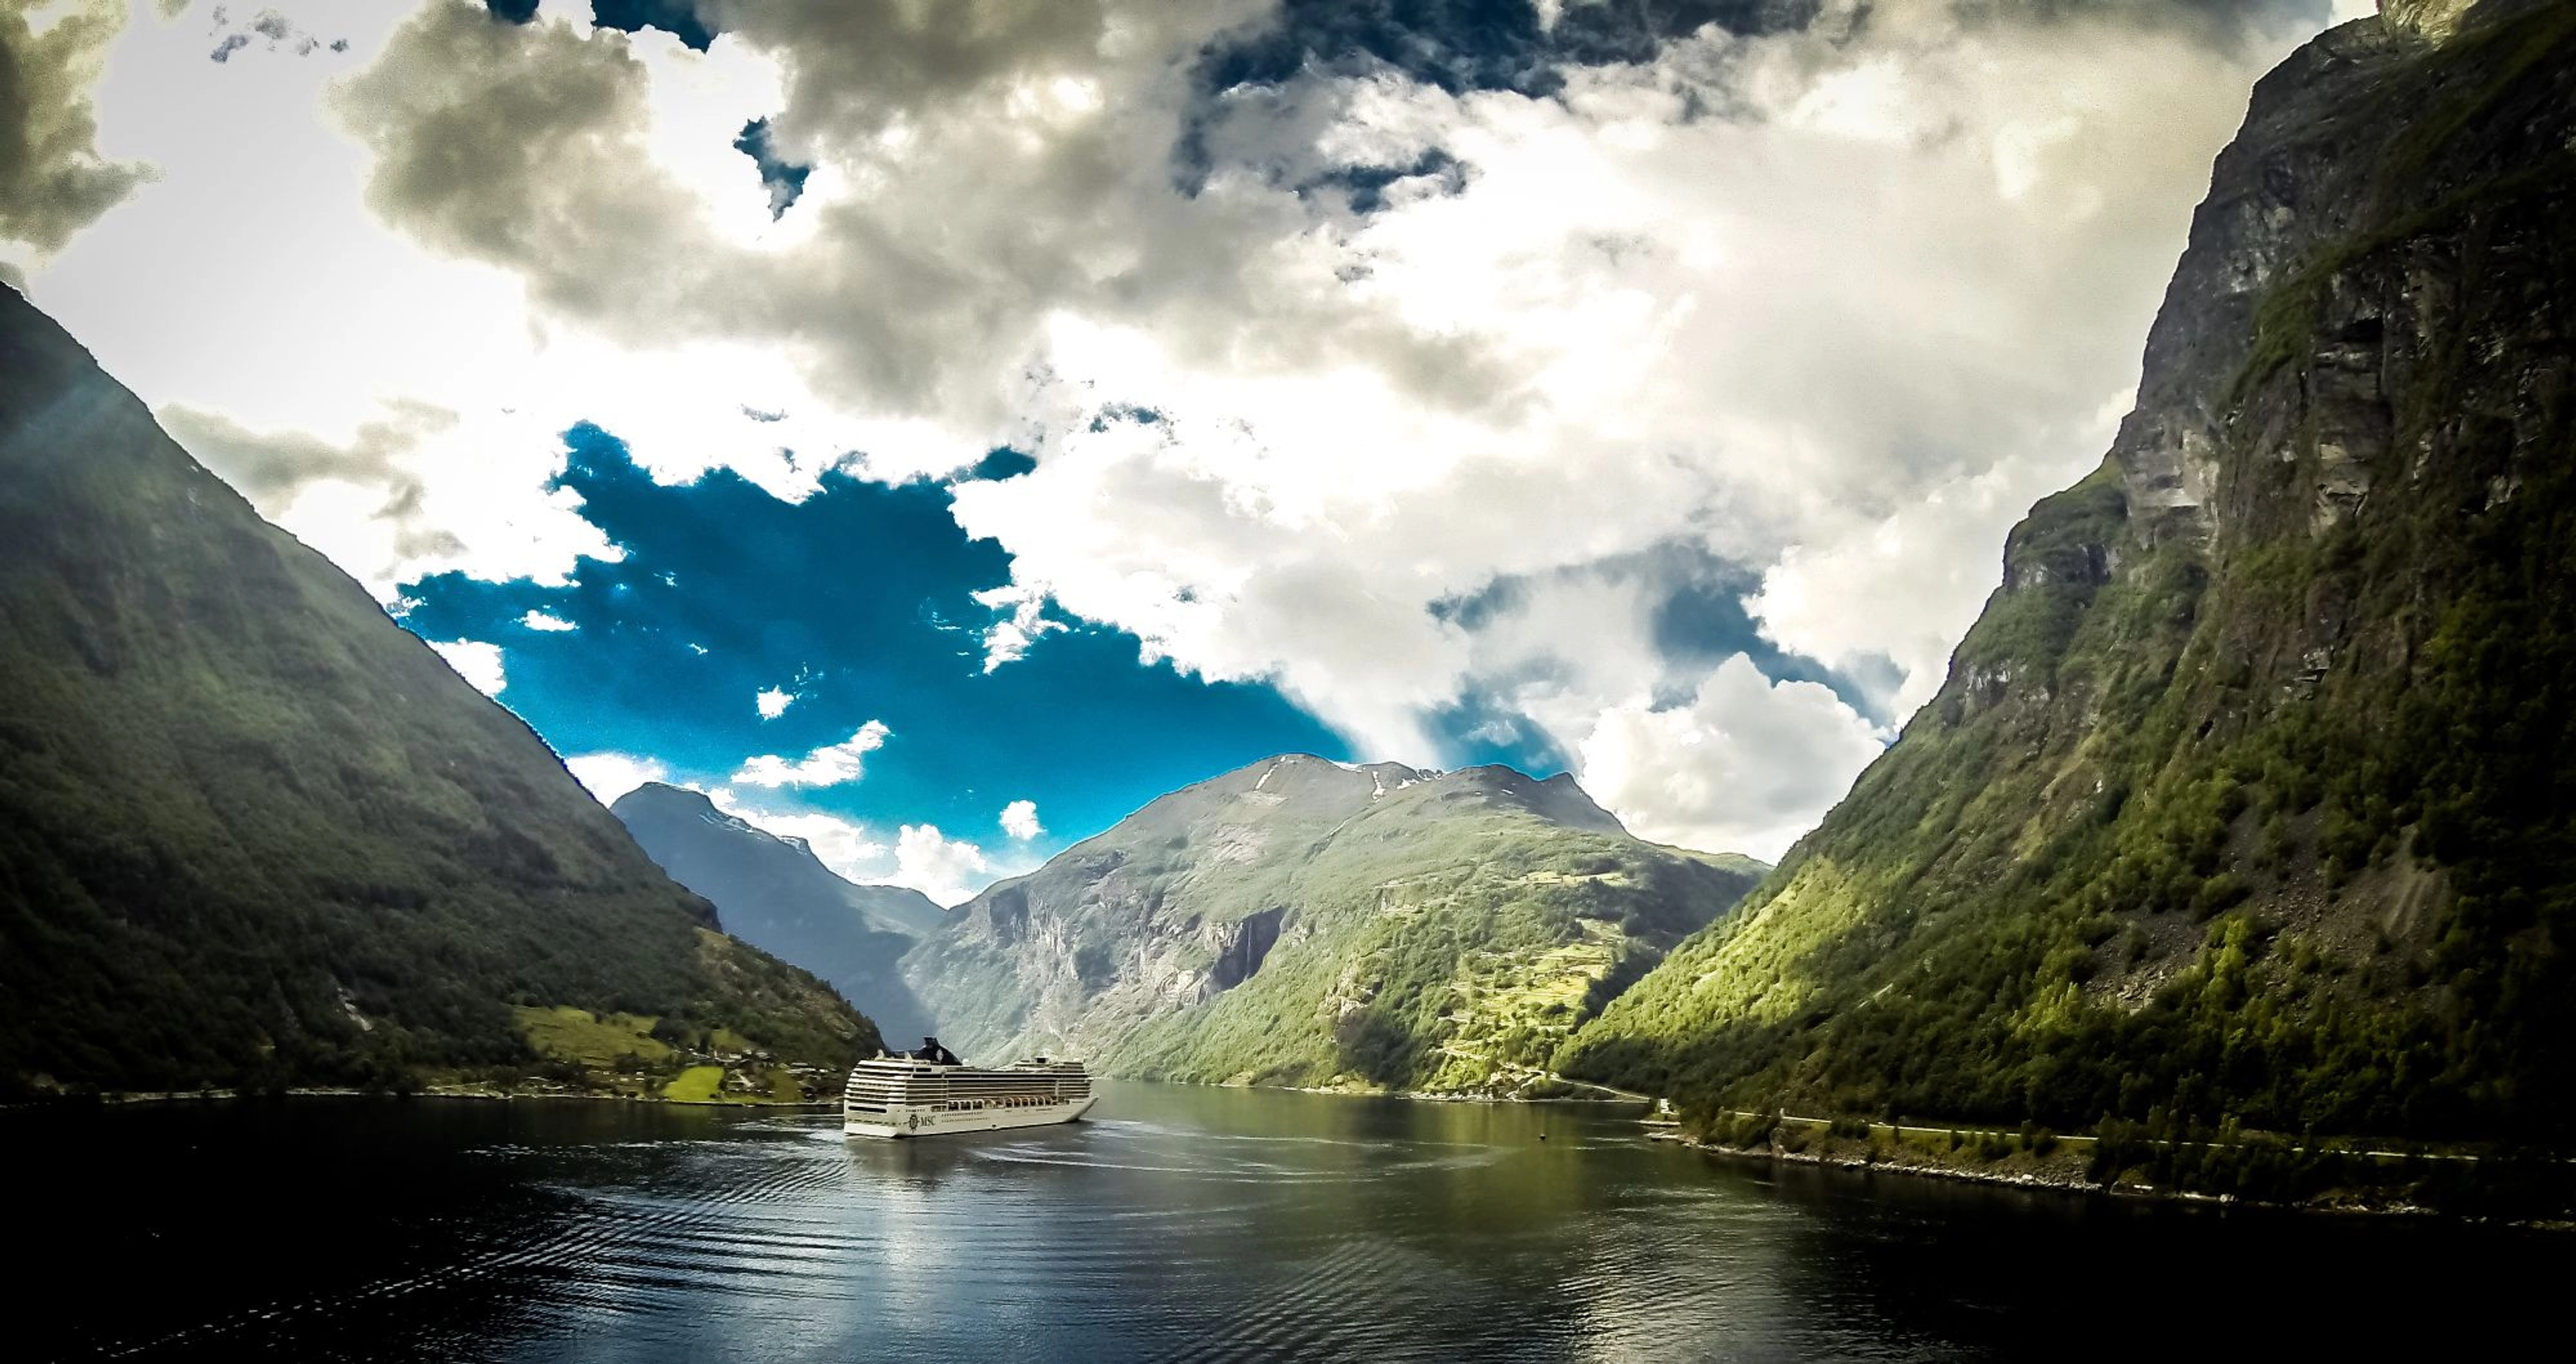 The Geirangerfjord , Norway